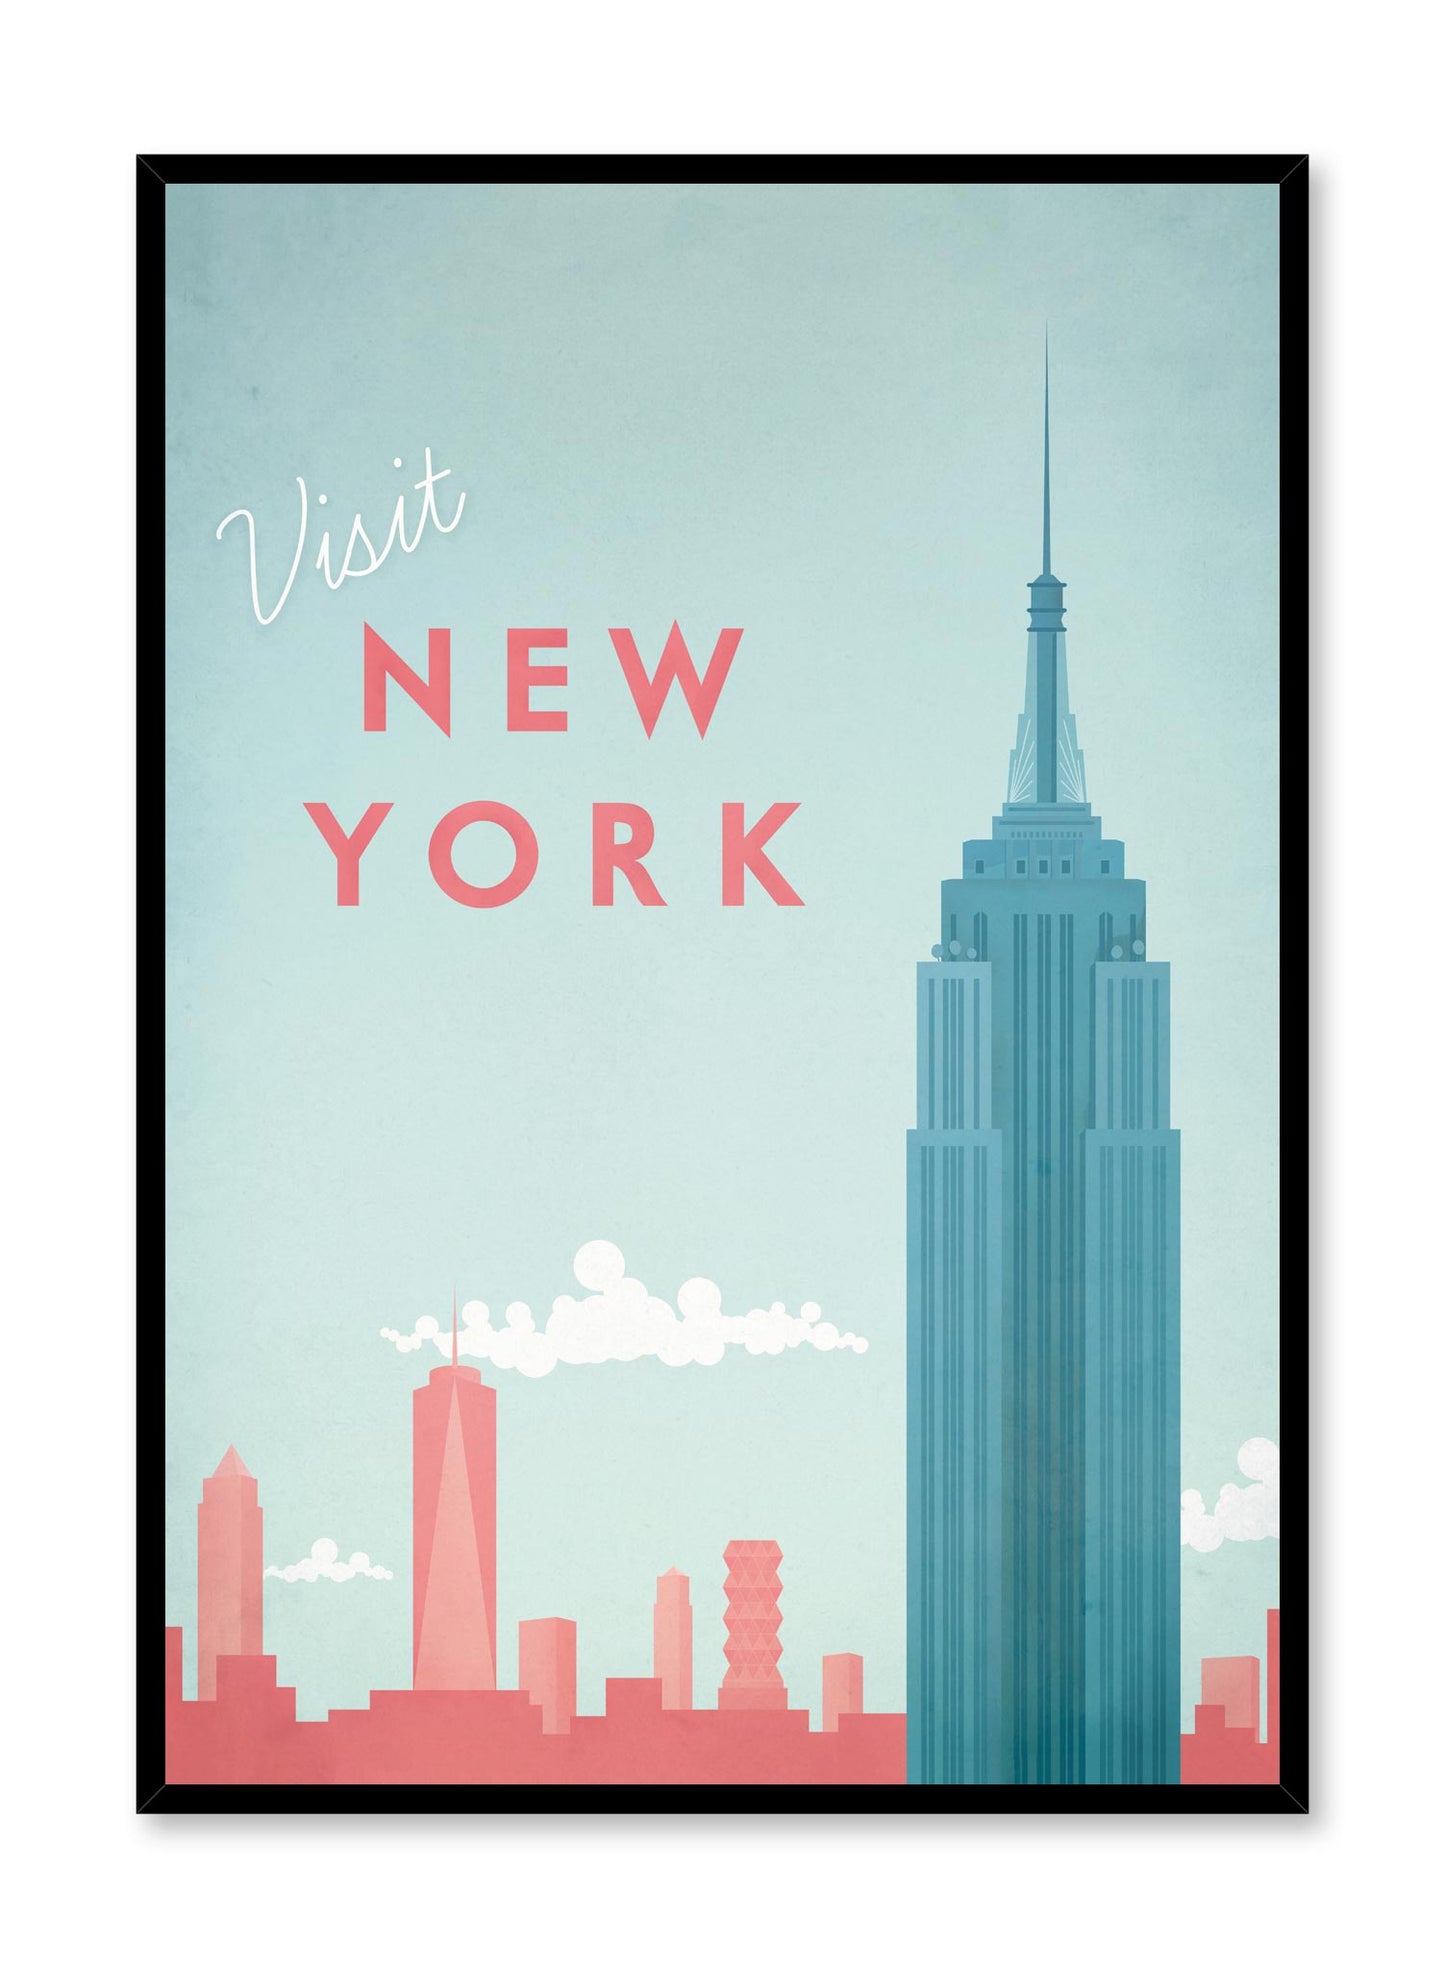 Modern minimalist travel poster by Opposite Wall with illustration of New York